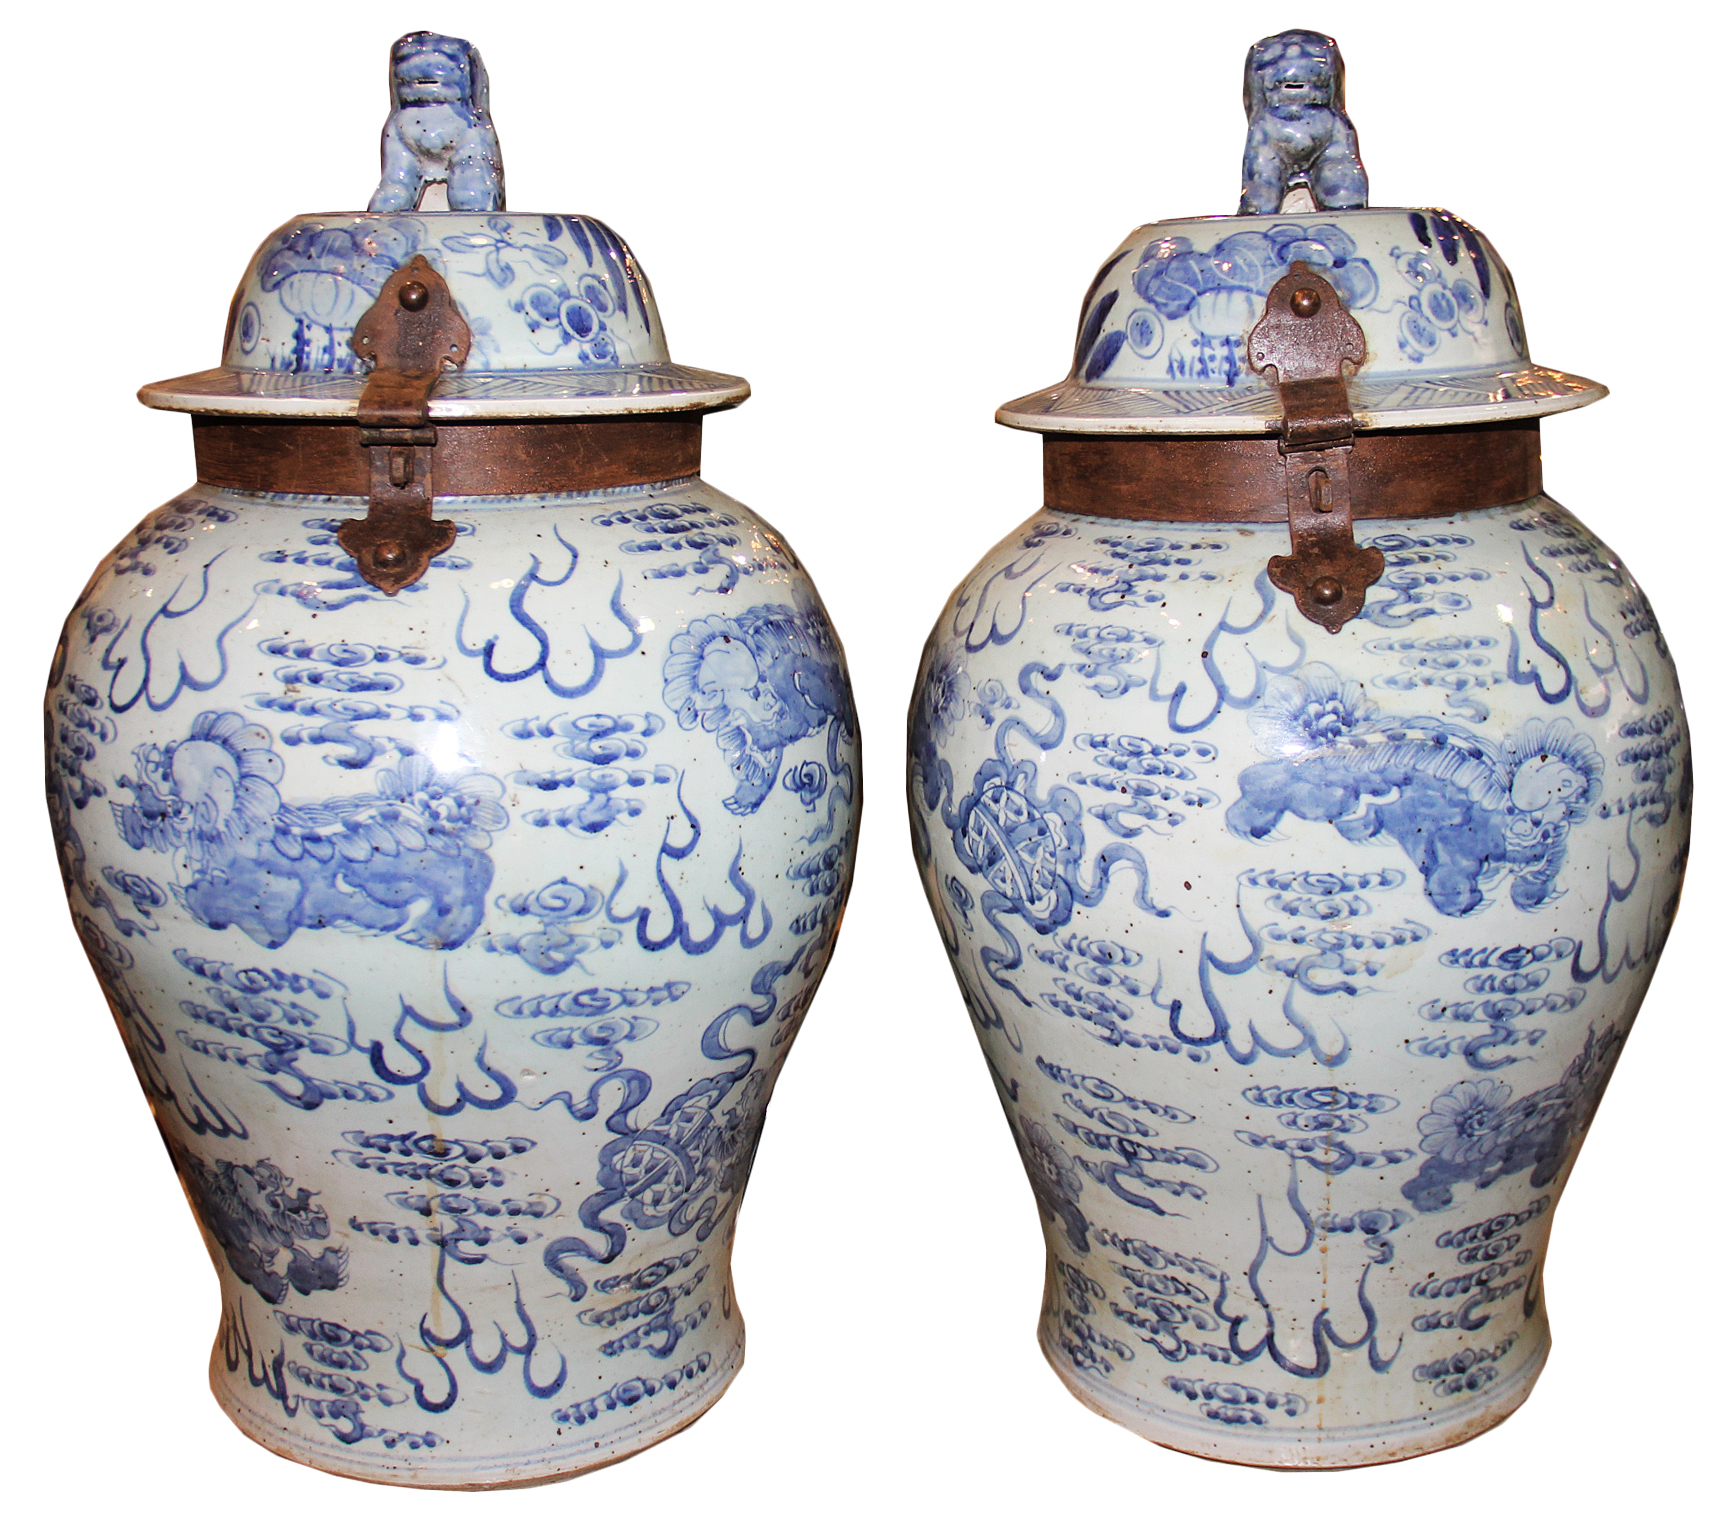 An Unusual Pair of 19th Century Chinese Export Hand Painted Porcelain Jars No. 4482